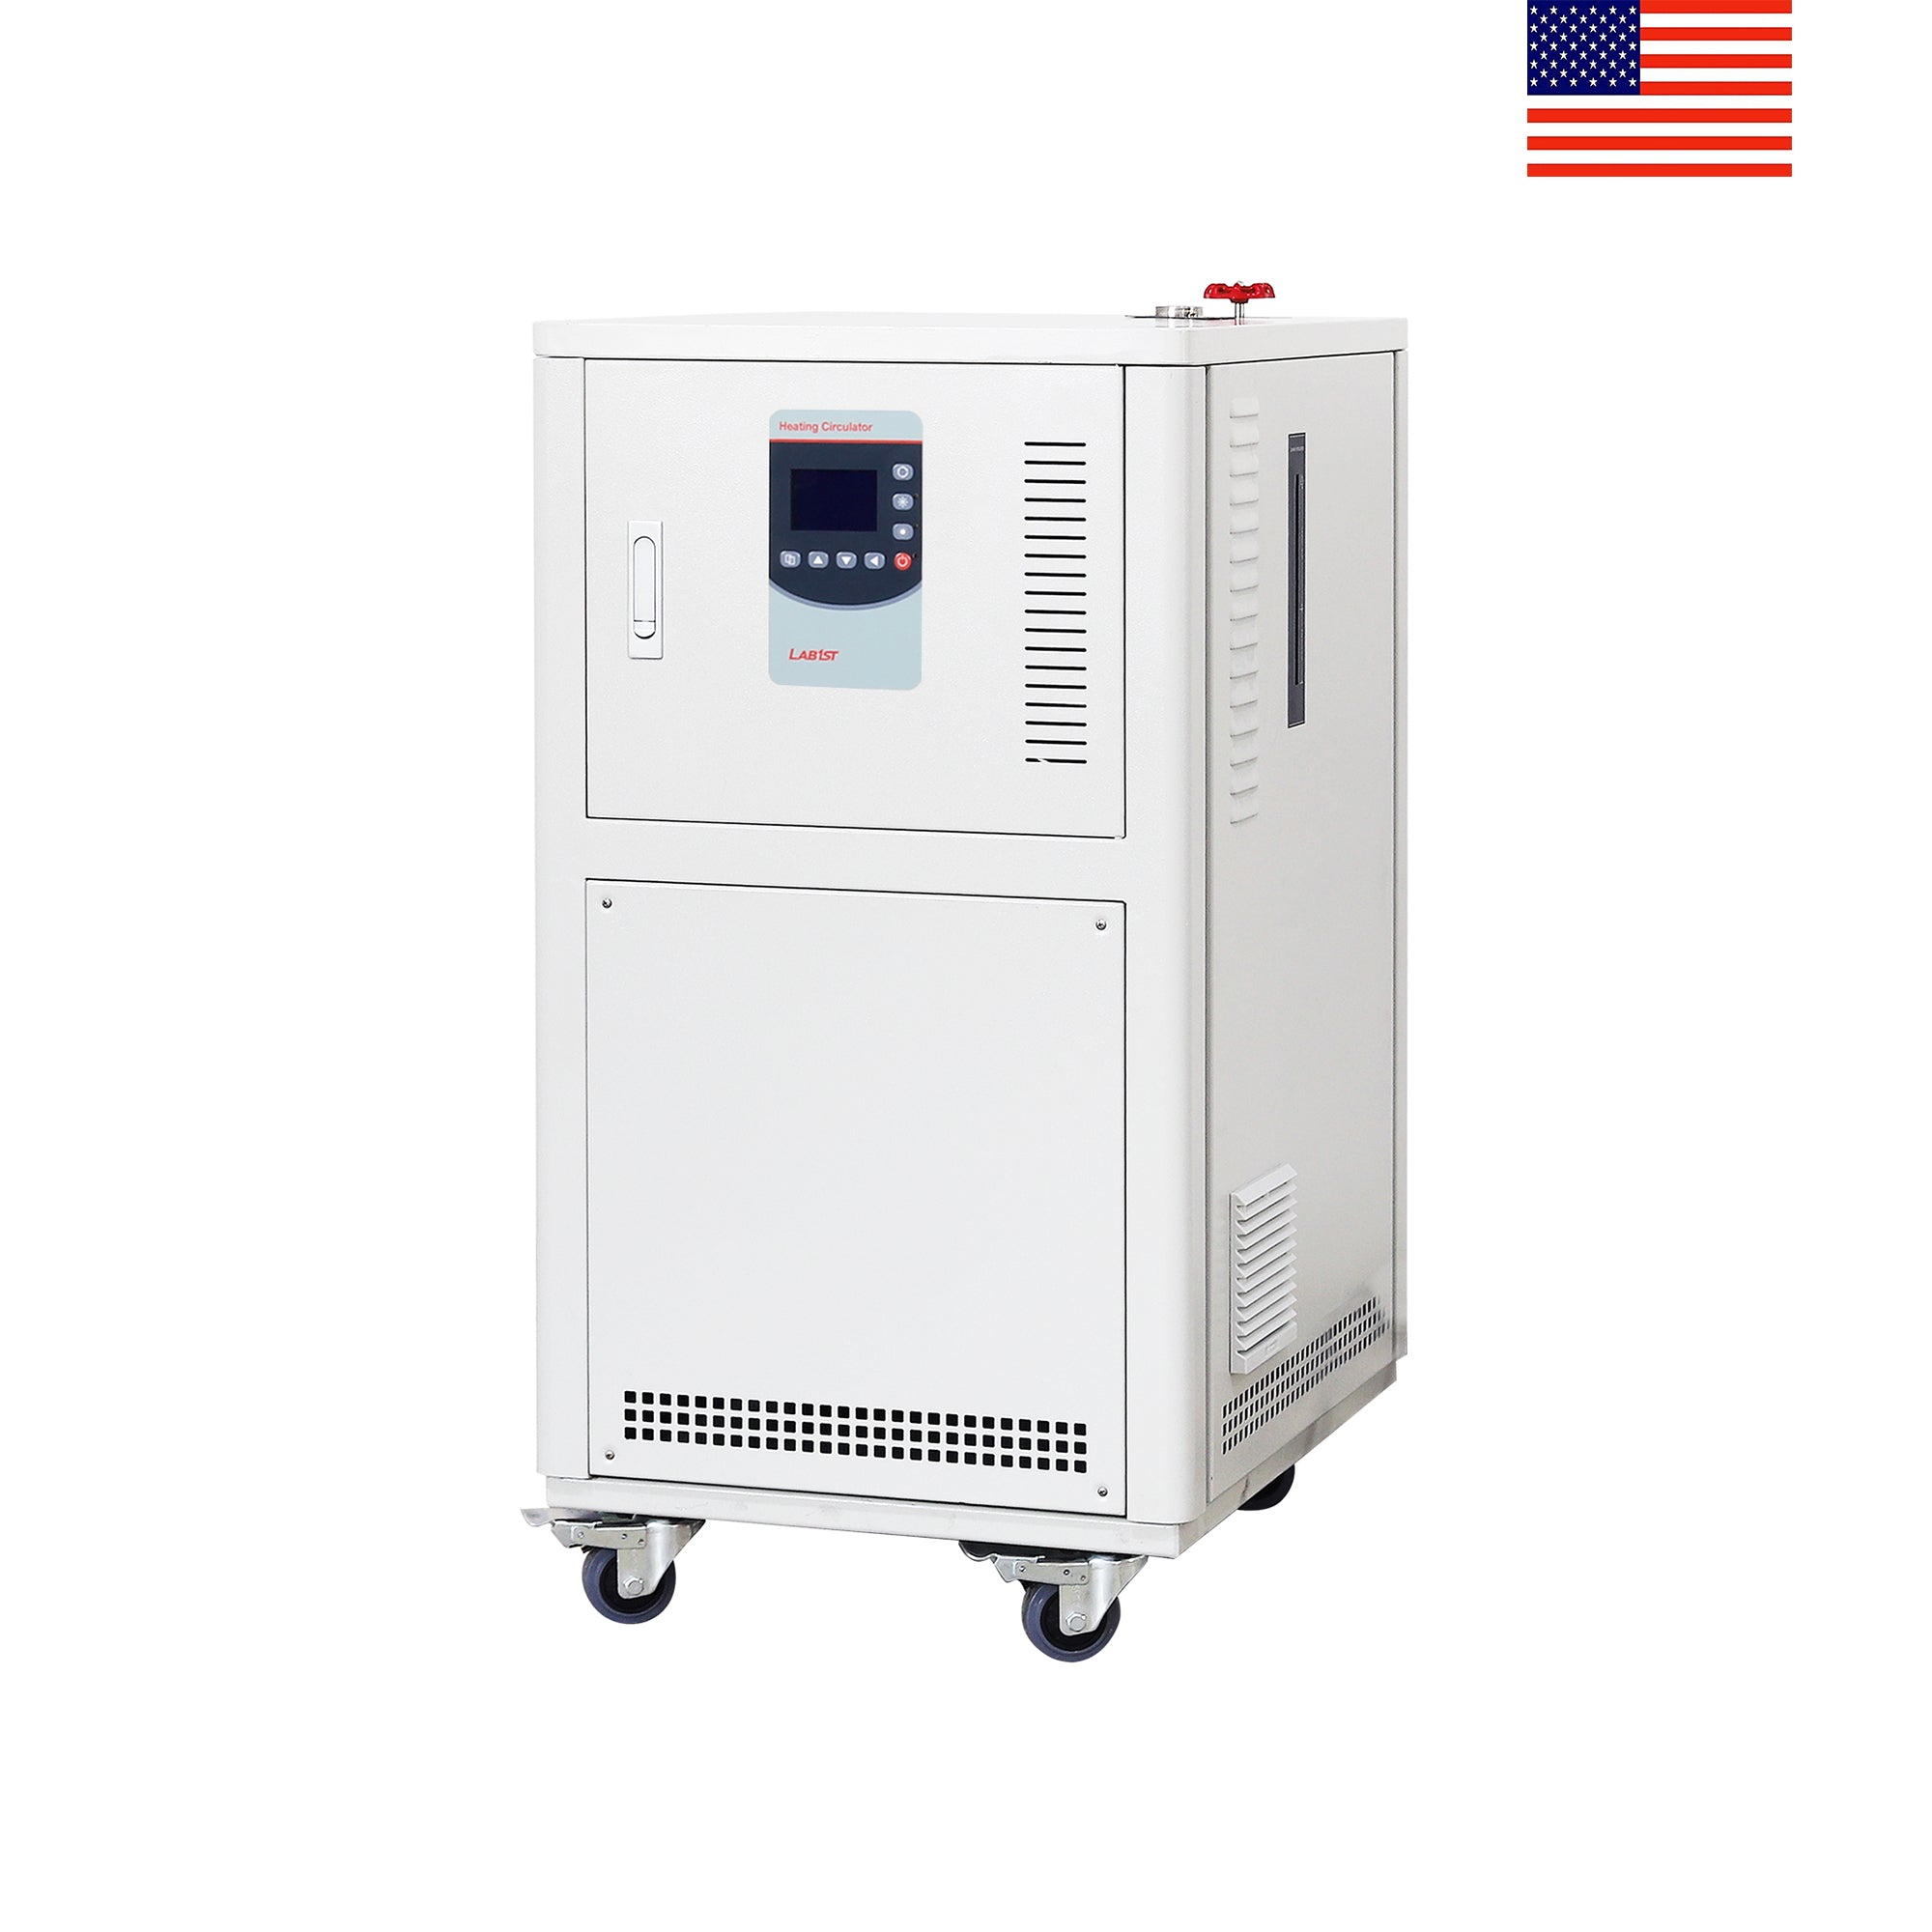 USA Delivery 25L/min 3.5kW Heating Power Up to 200C Hermatic Heating Circulator with Water Cooling for Rapid Chilling